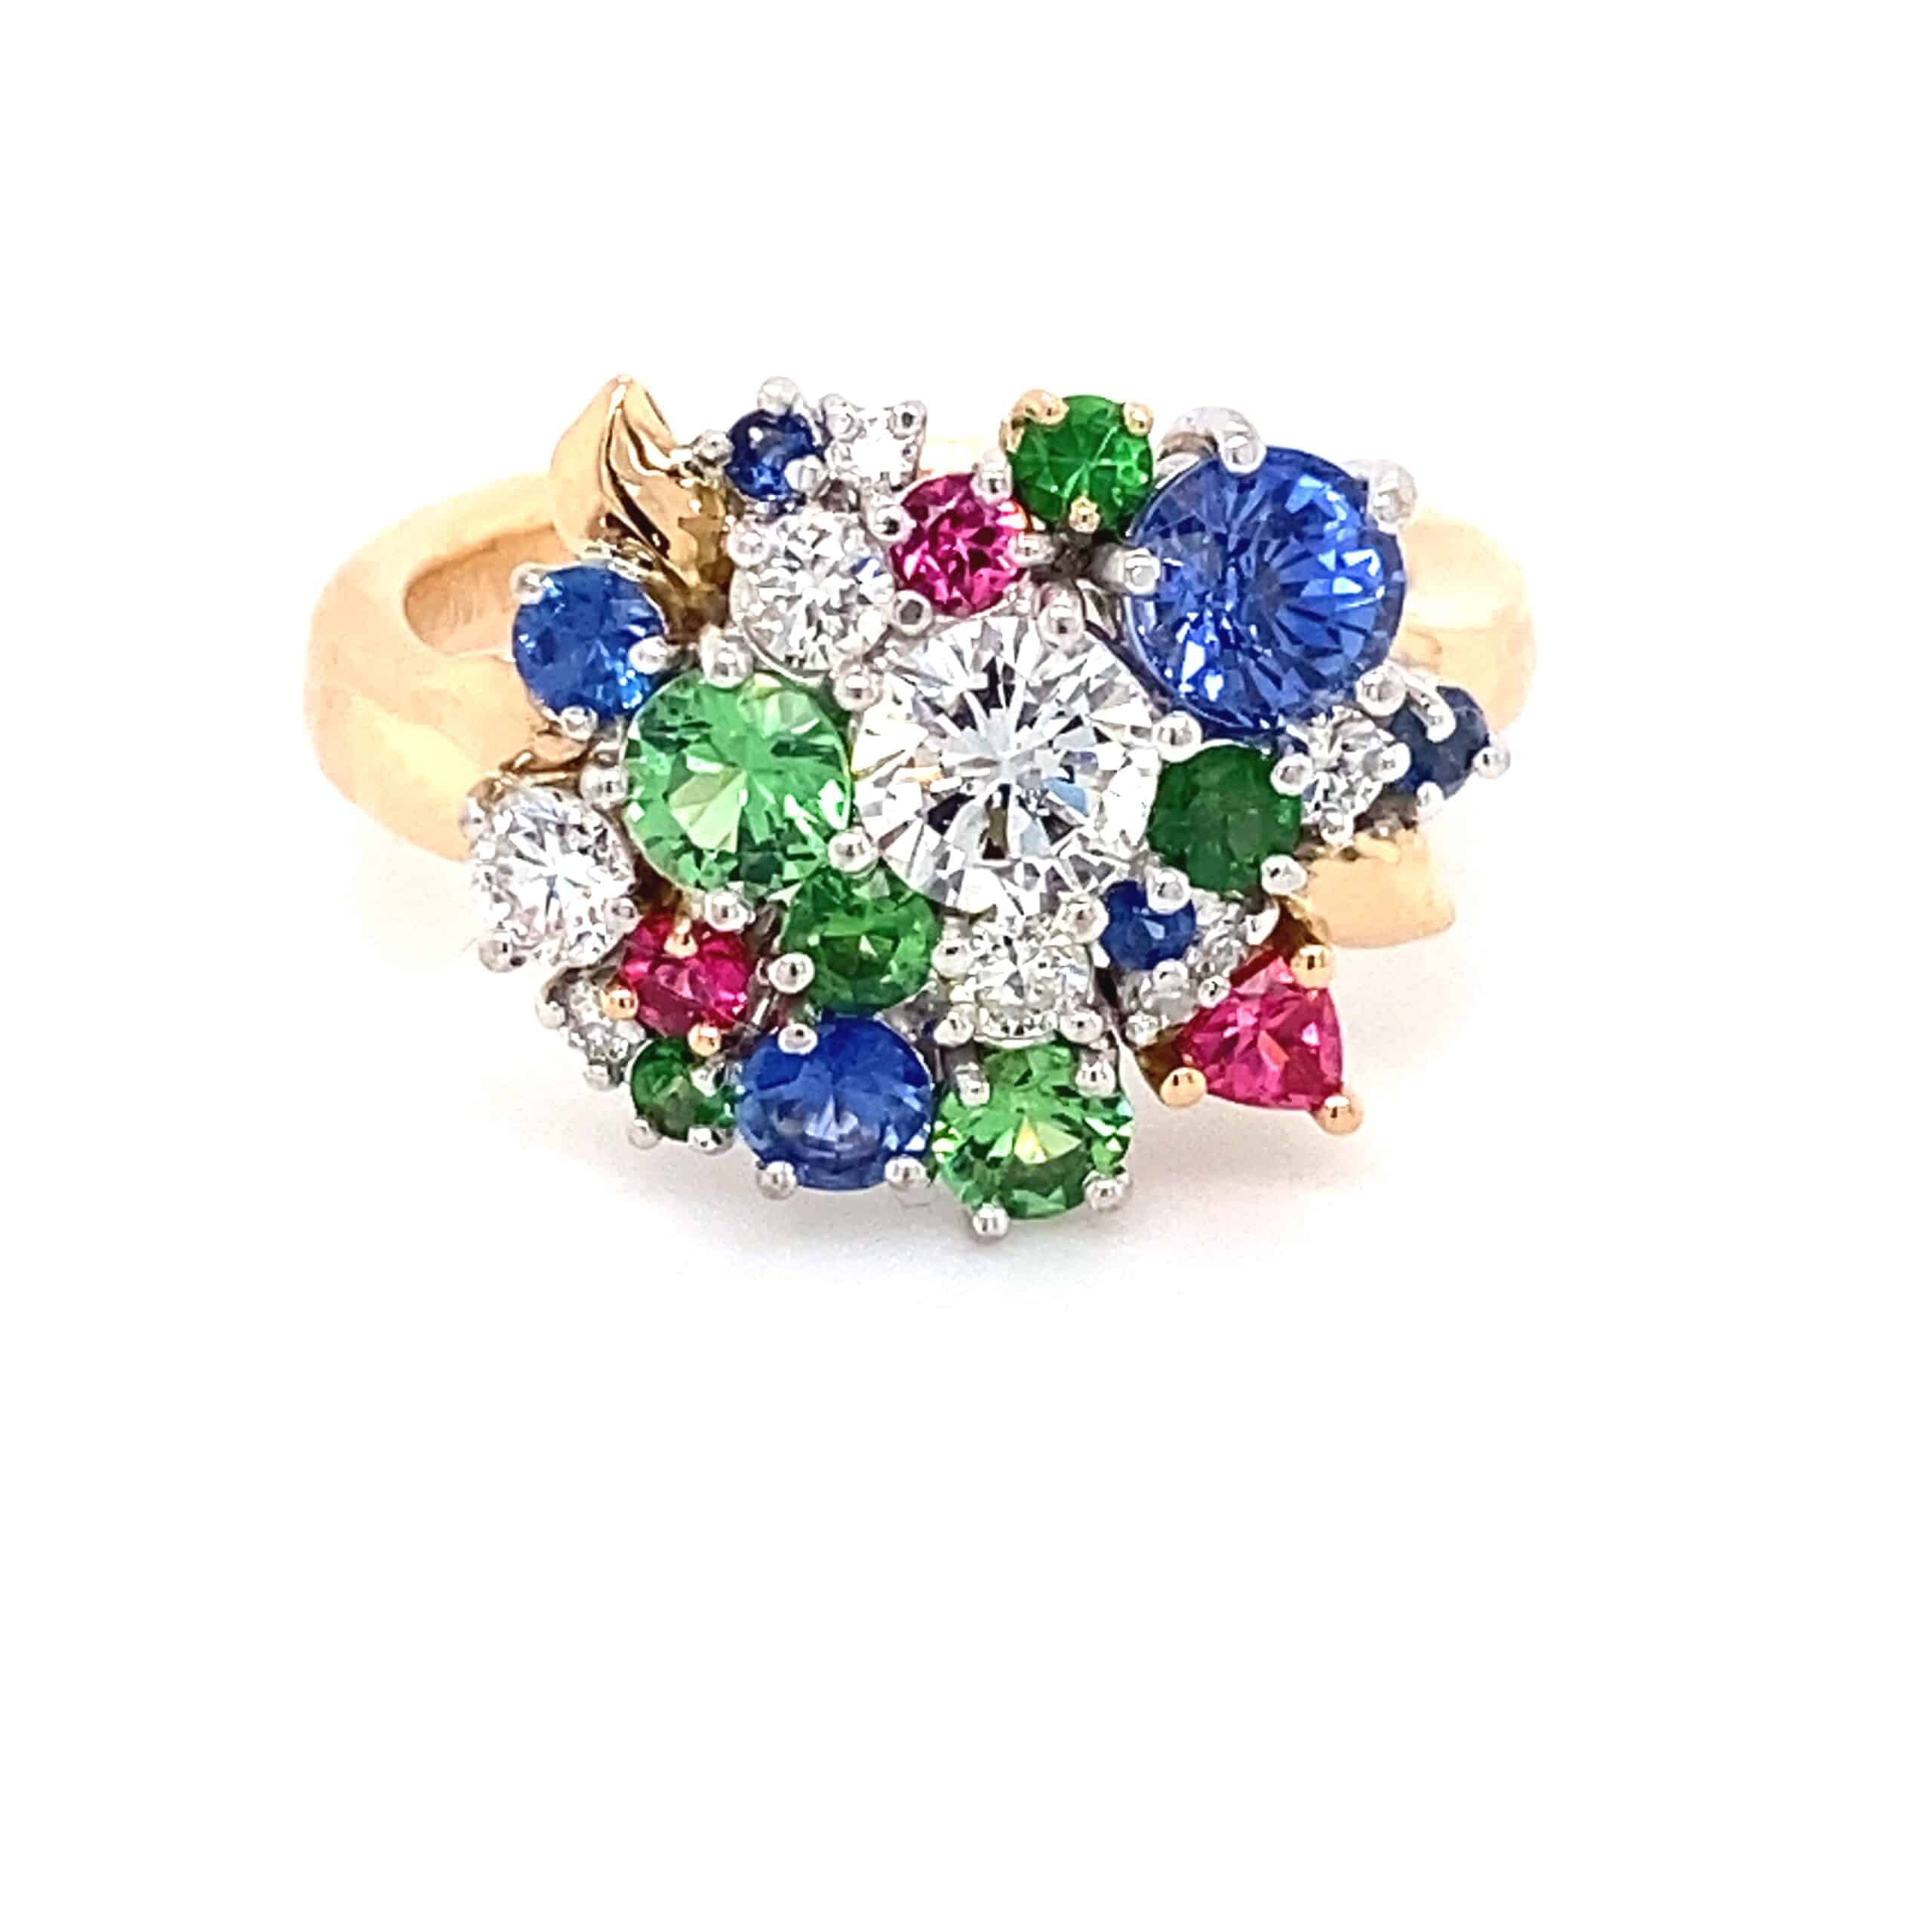 Client Jewellery Remodelling Story: Garden of Flowers Ring